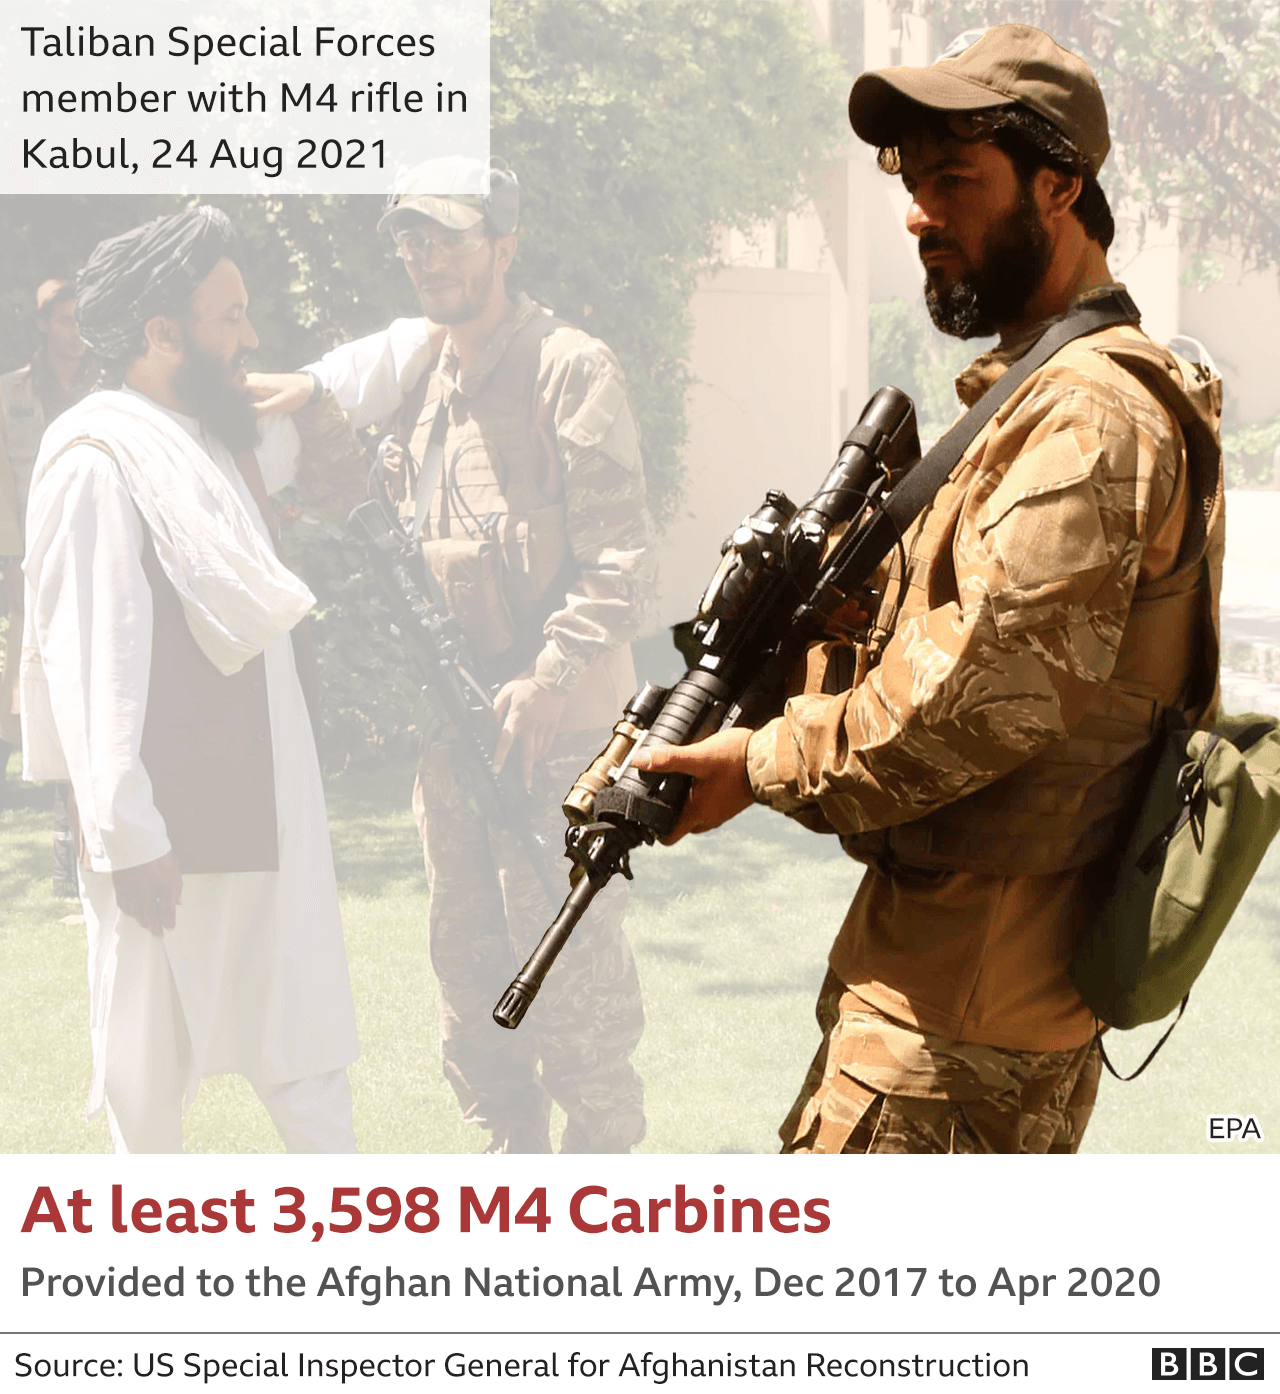 Image showing Taliban special forces with M4 Carbine